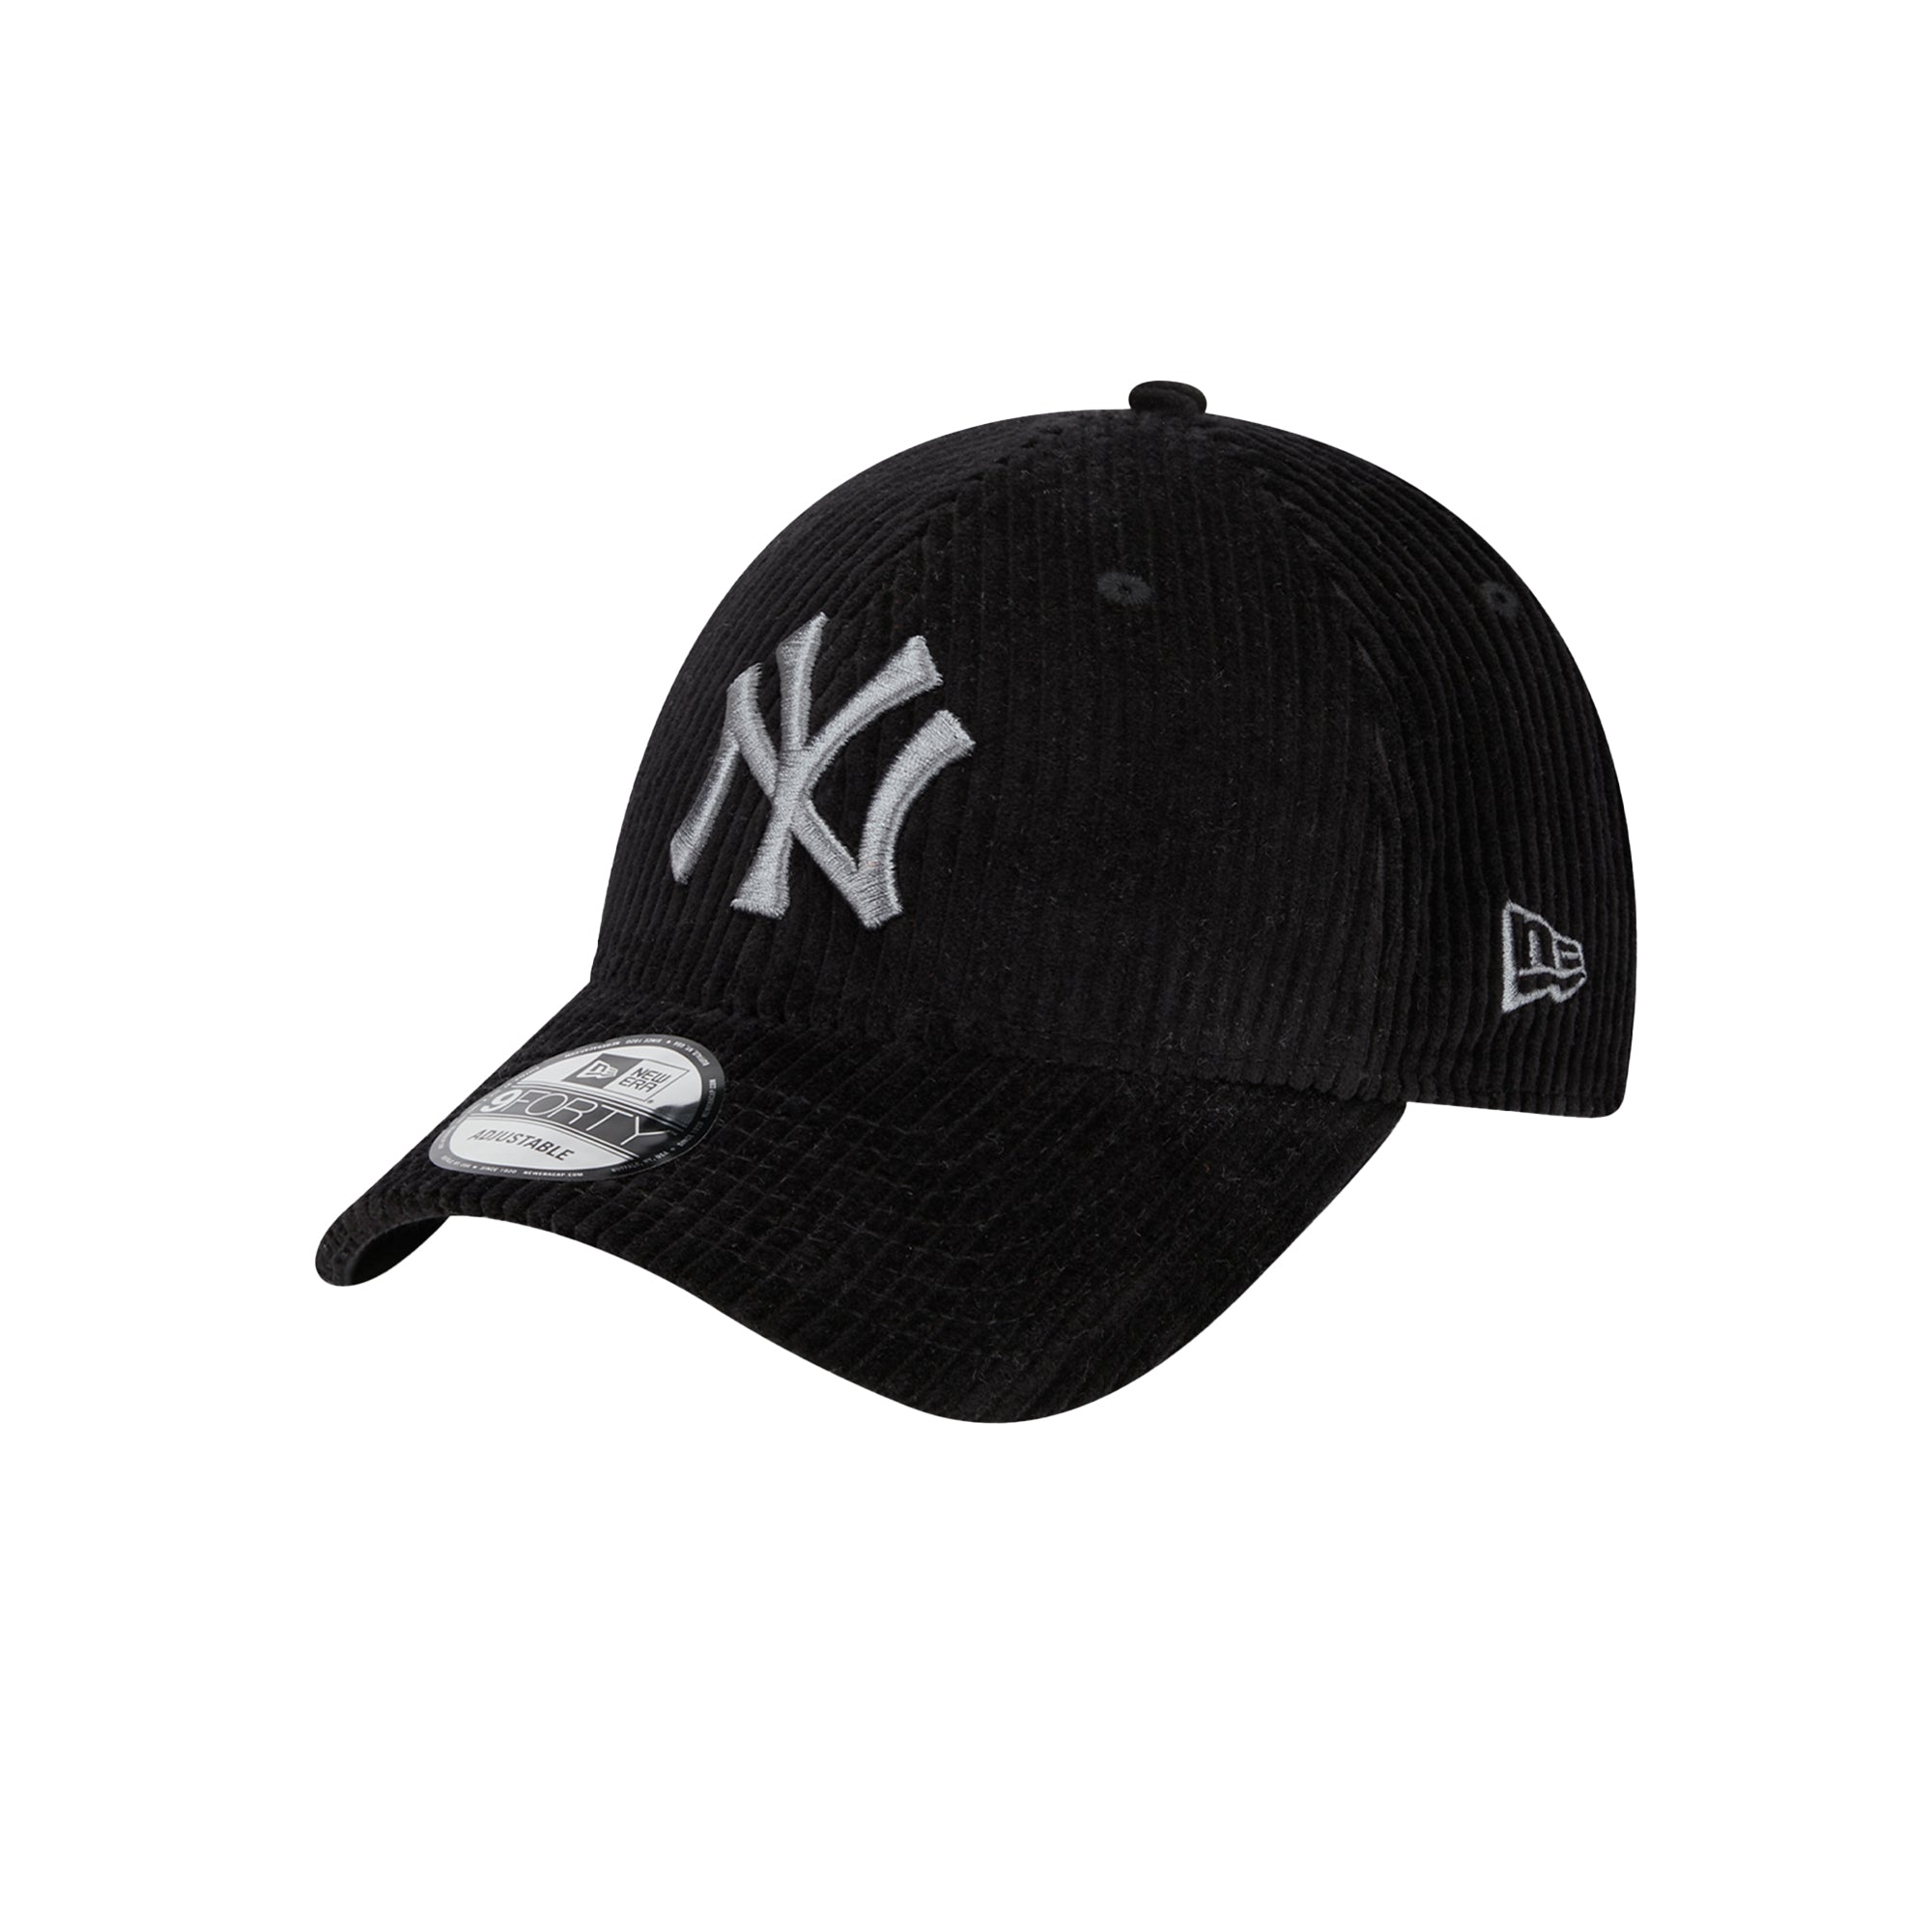 New York Yankees Wide Cord Black 9FORTY Adjustable